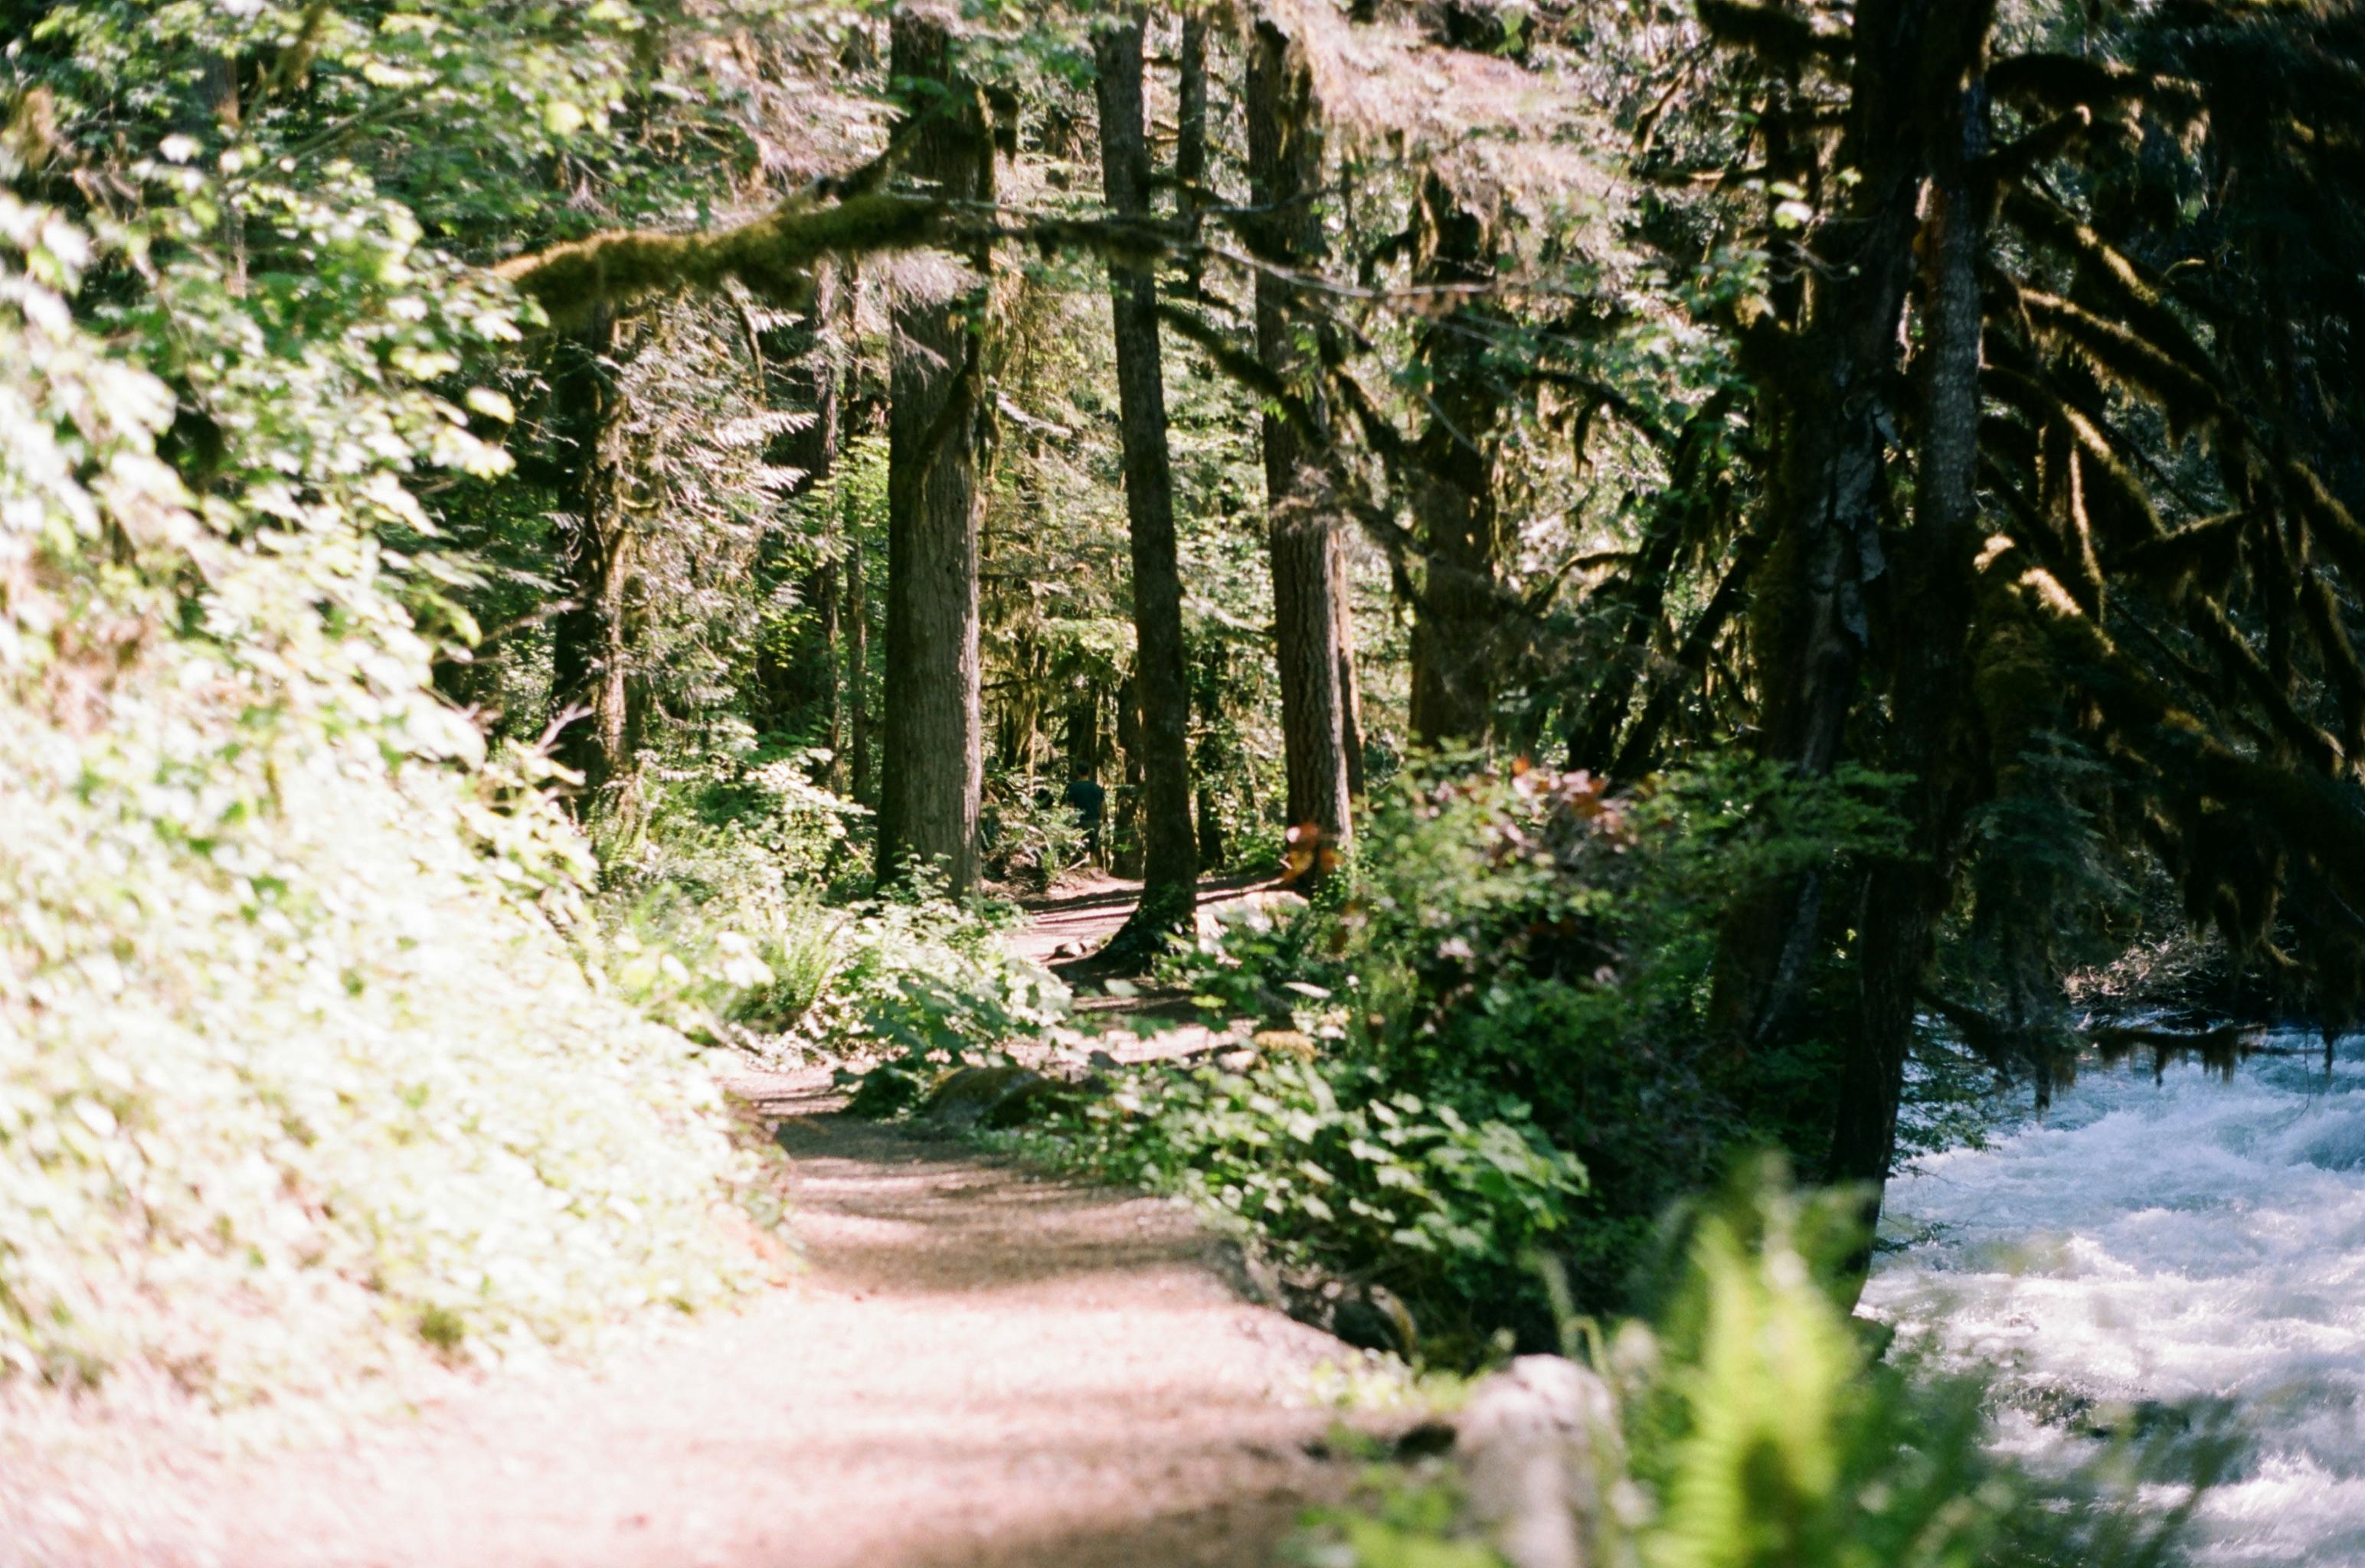 A path winding alongside a river through a leafy green forest